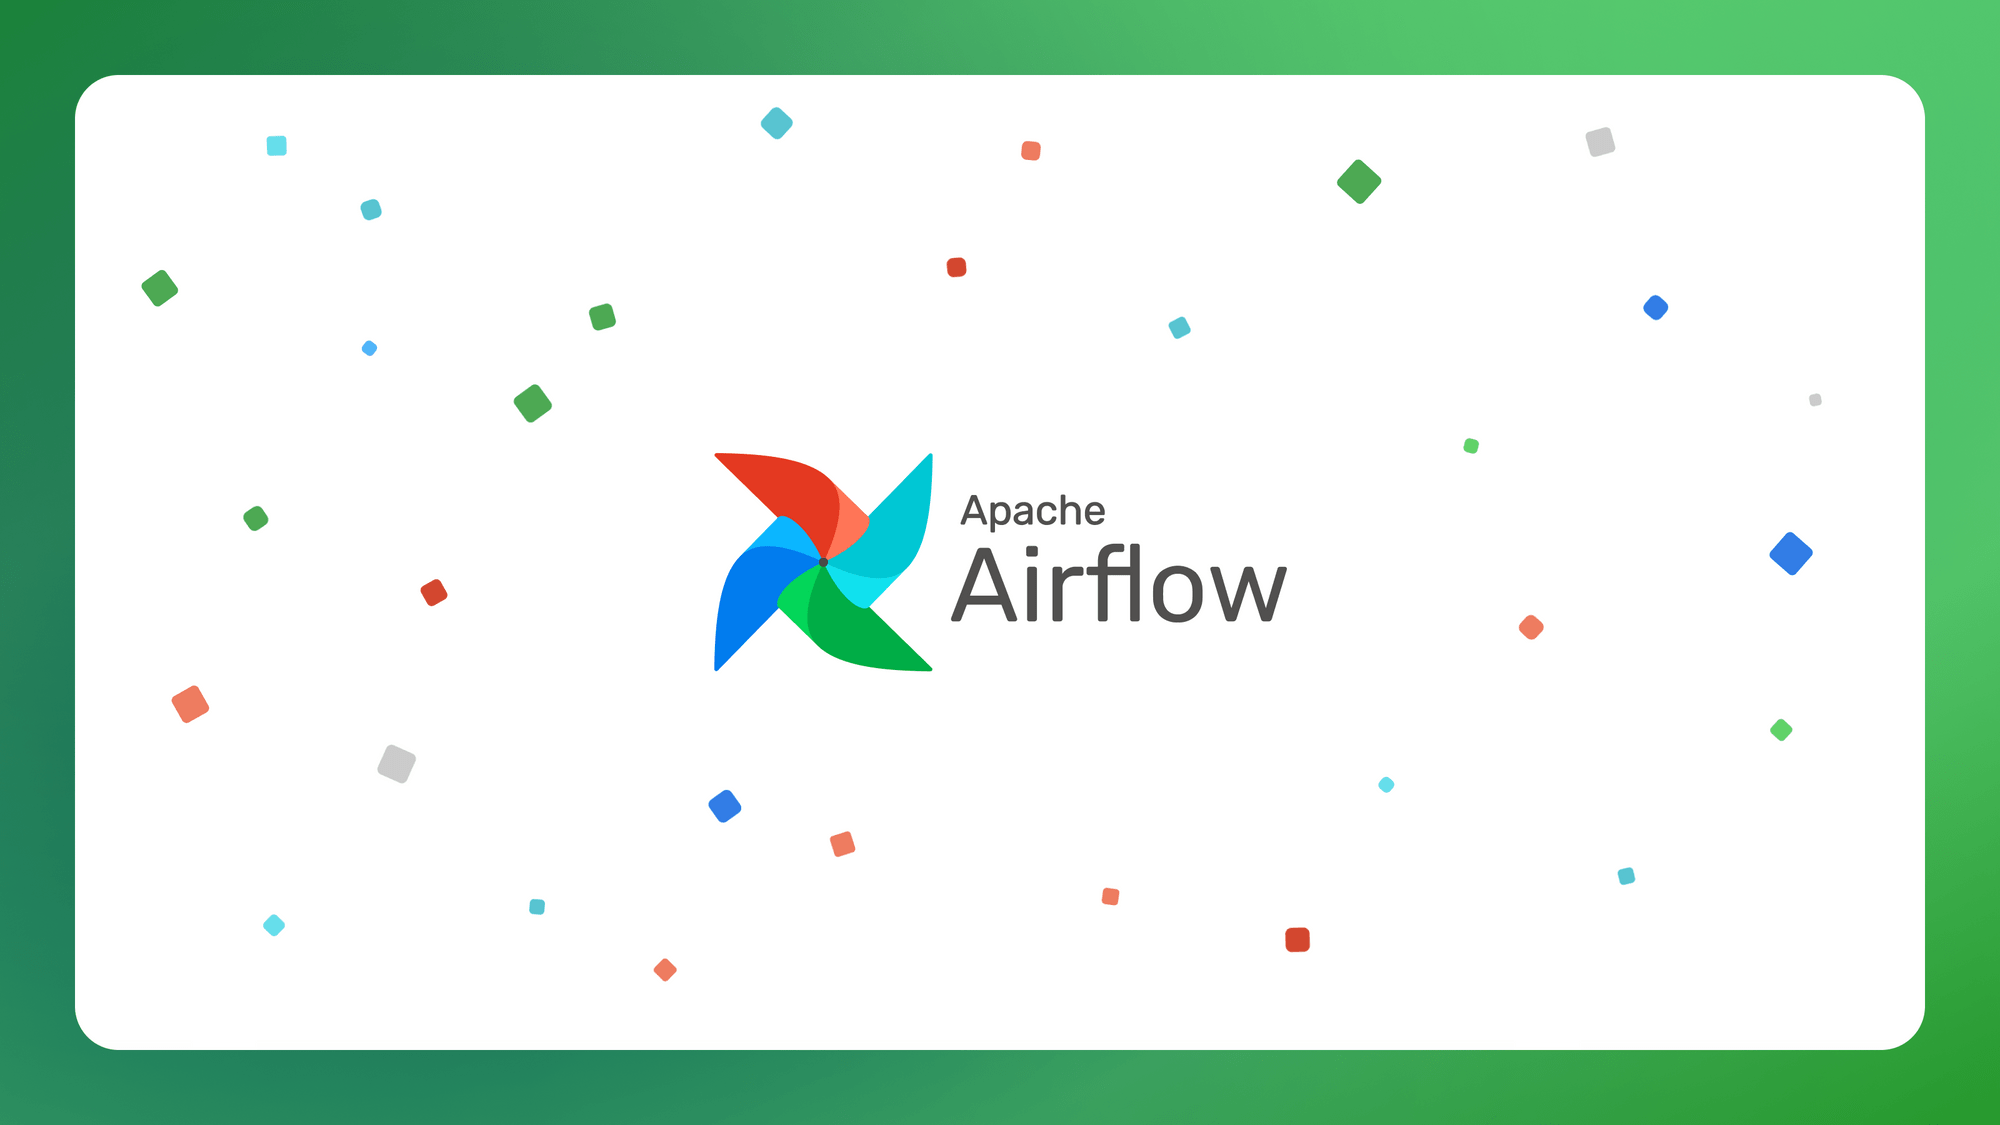 What is Airflow?